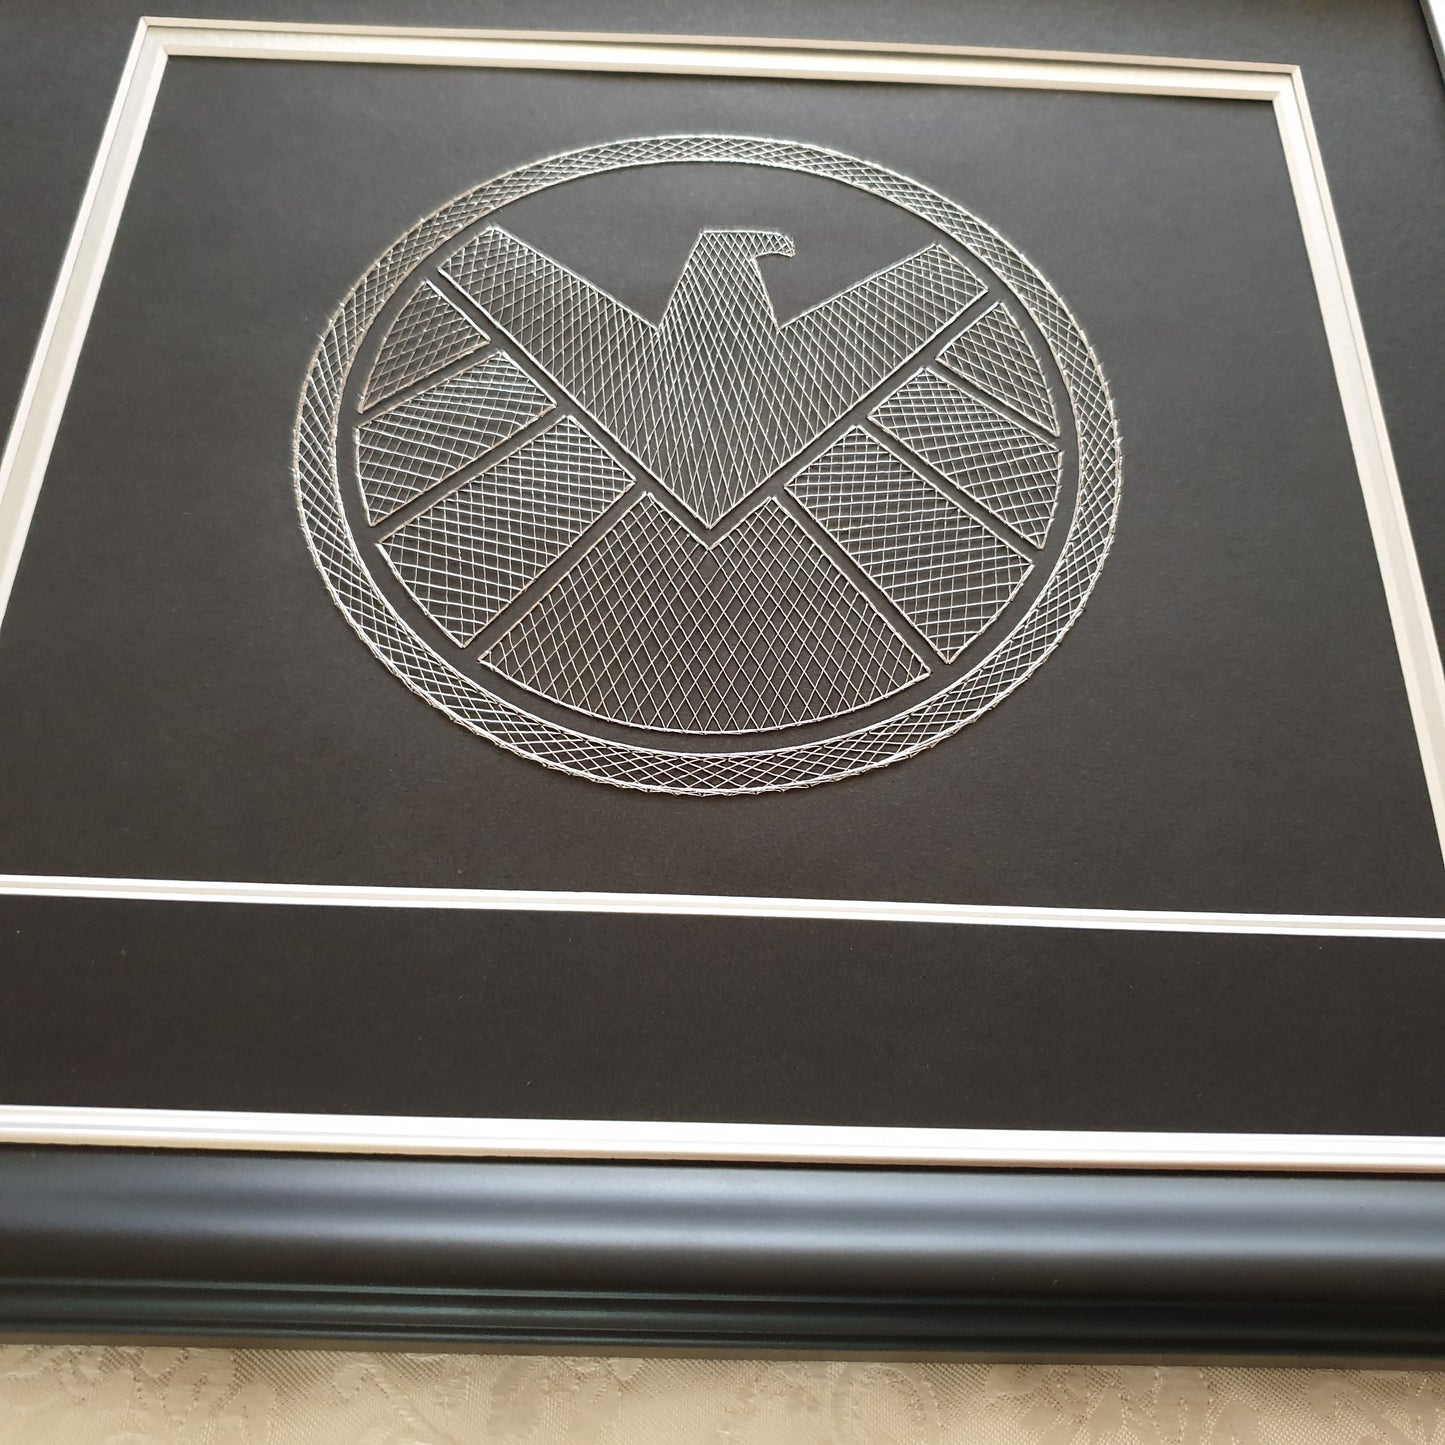 Agents of S.H.I.E.L.D.  Inspired Card Embroidery Kit (Black Card)